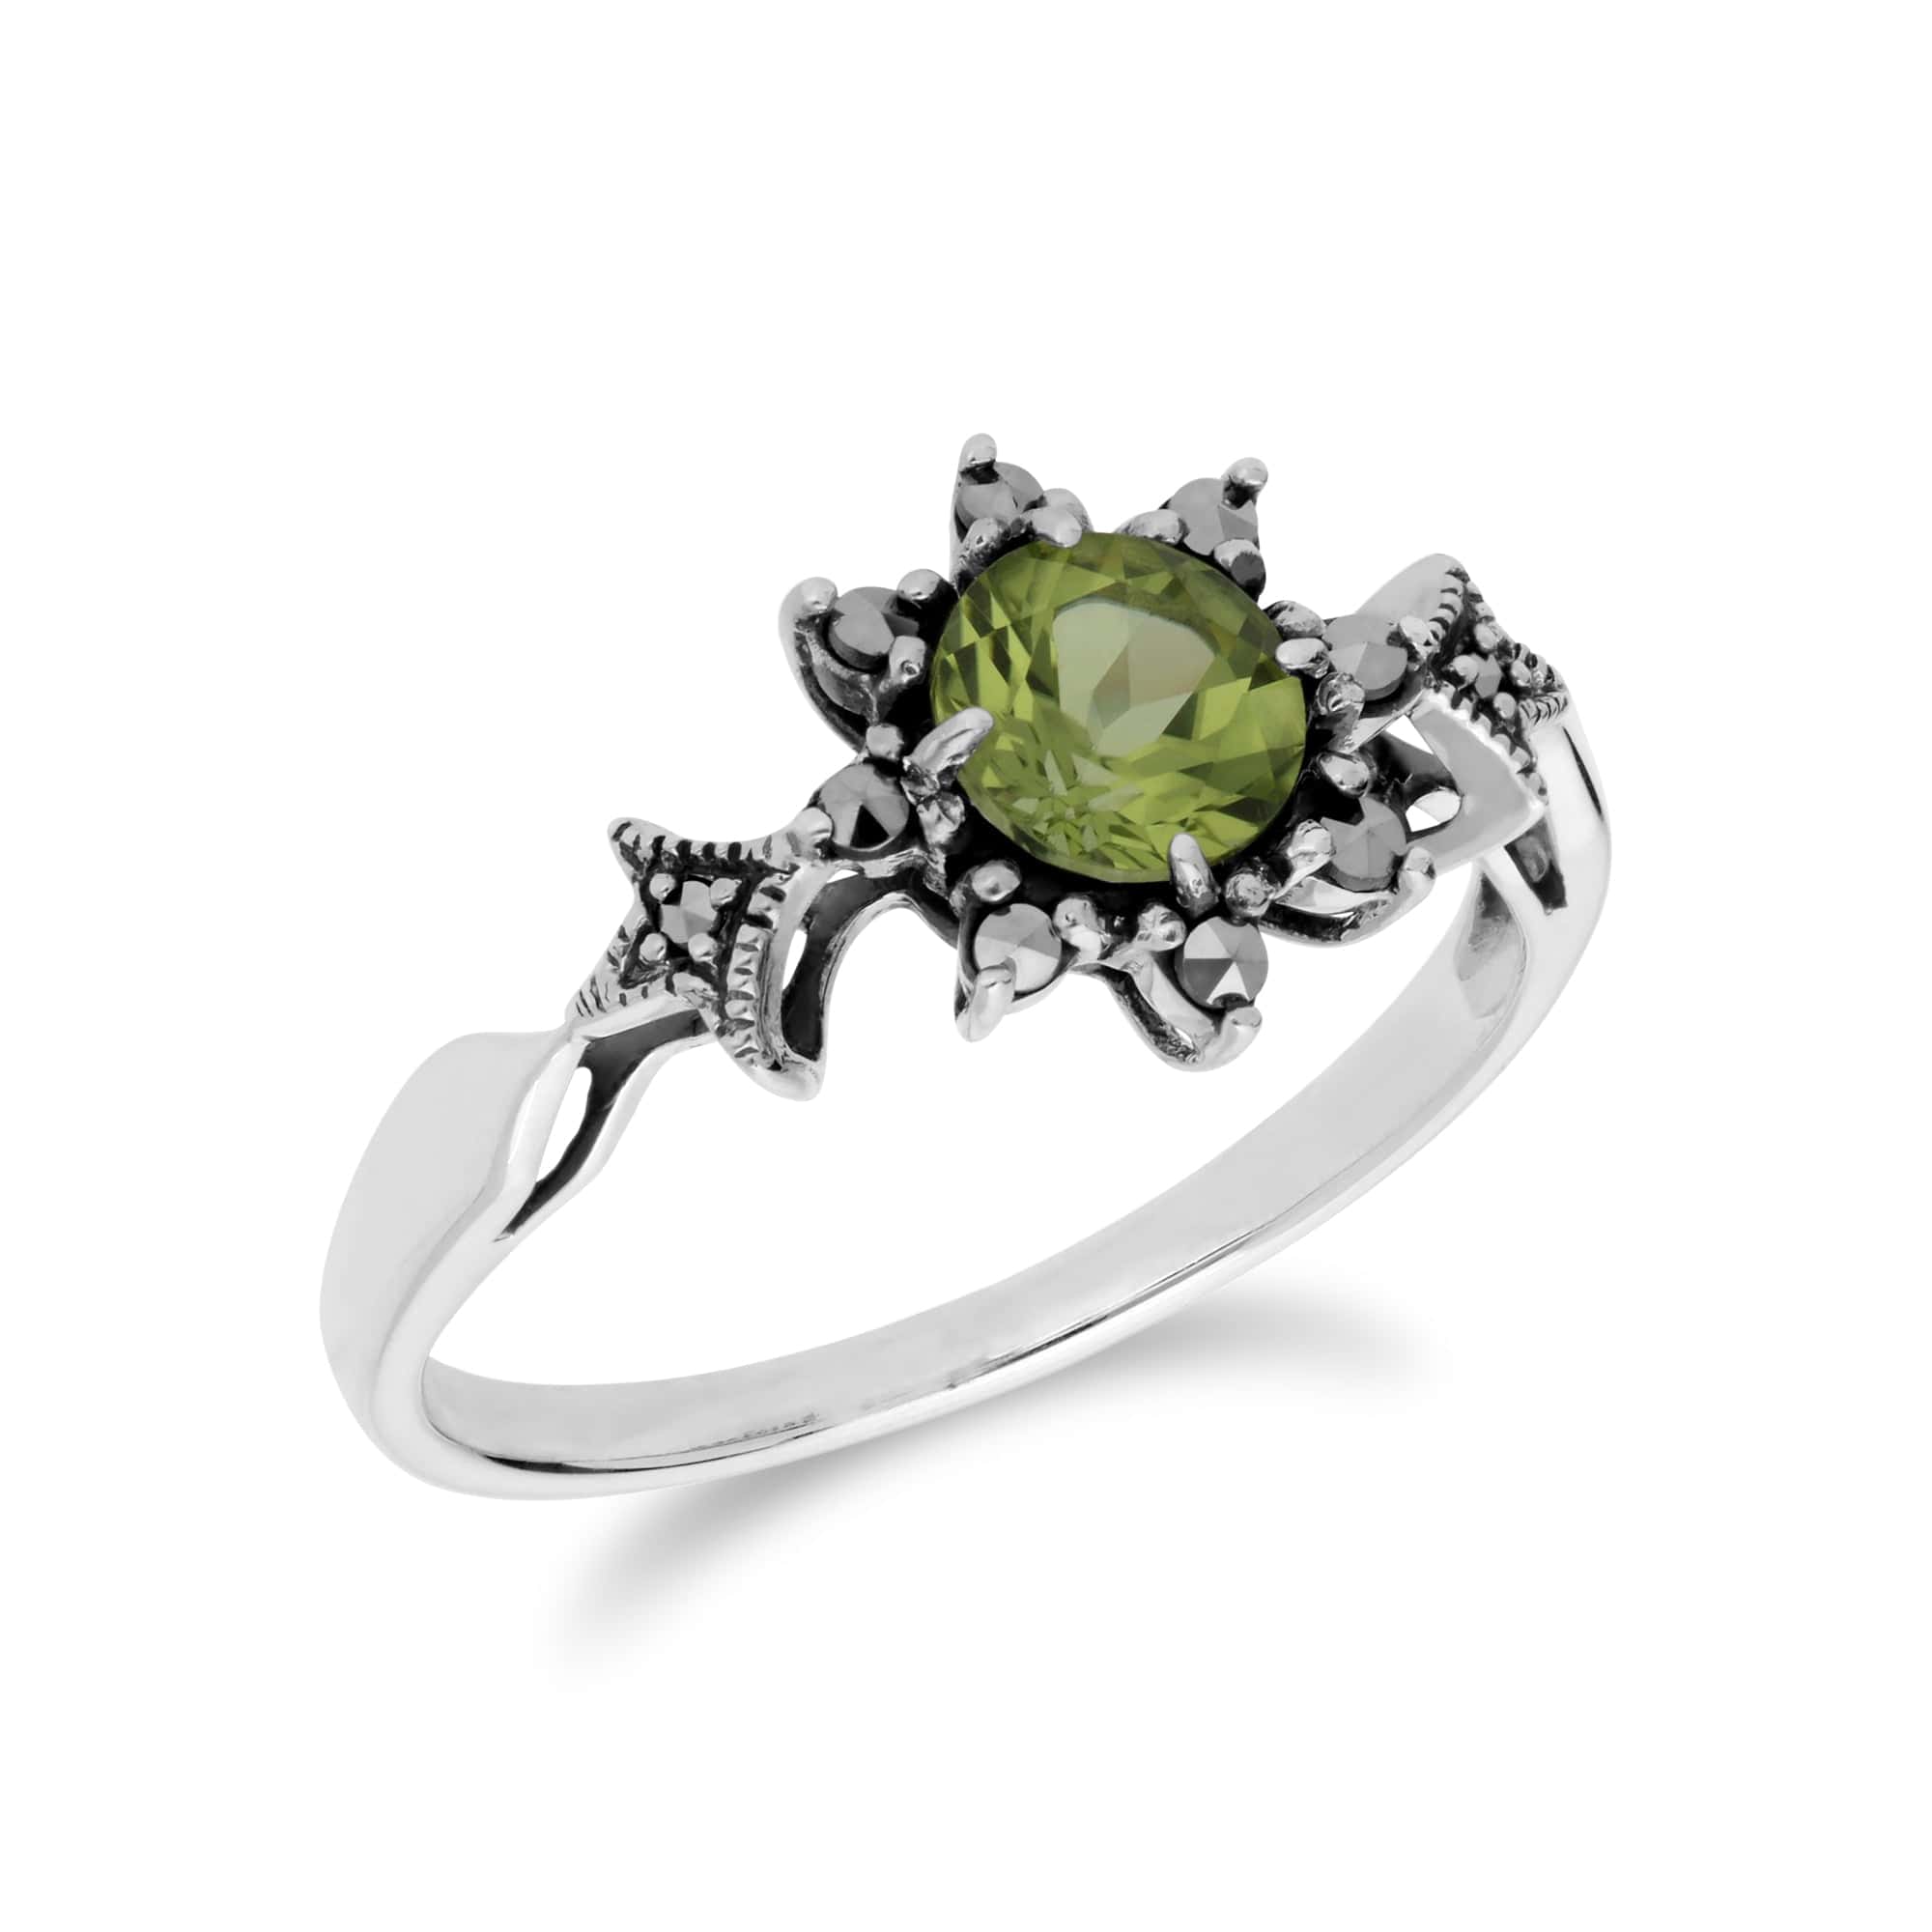 214R599504925 Art Deco Style Round Peridot & Marcasite Floral Ring in 925 Sterling Silver 2